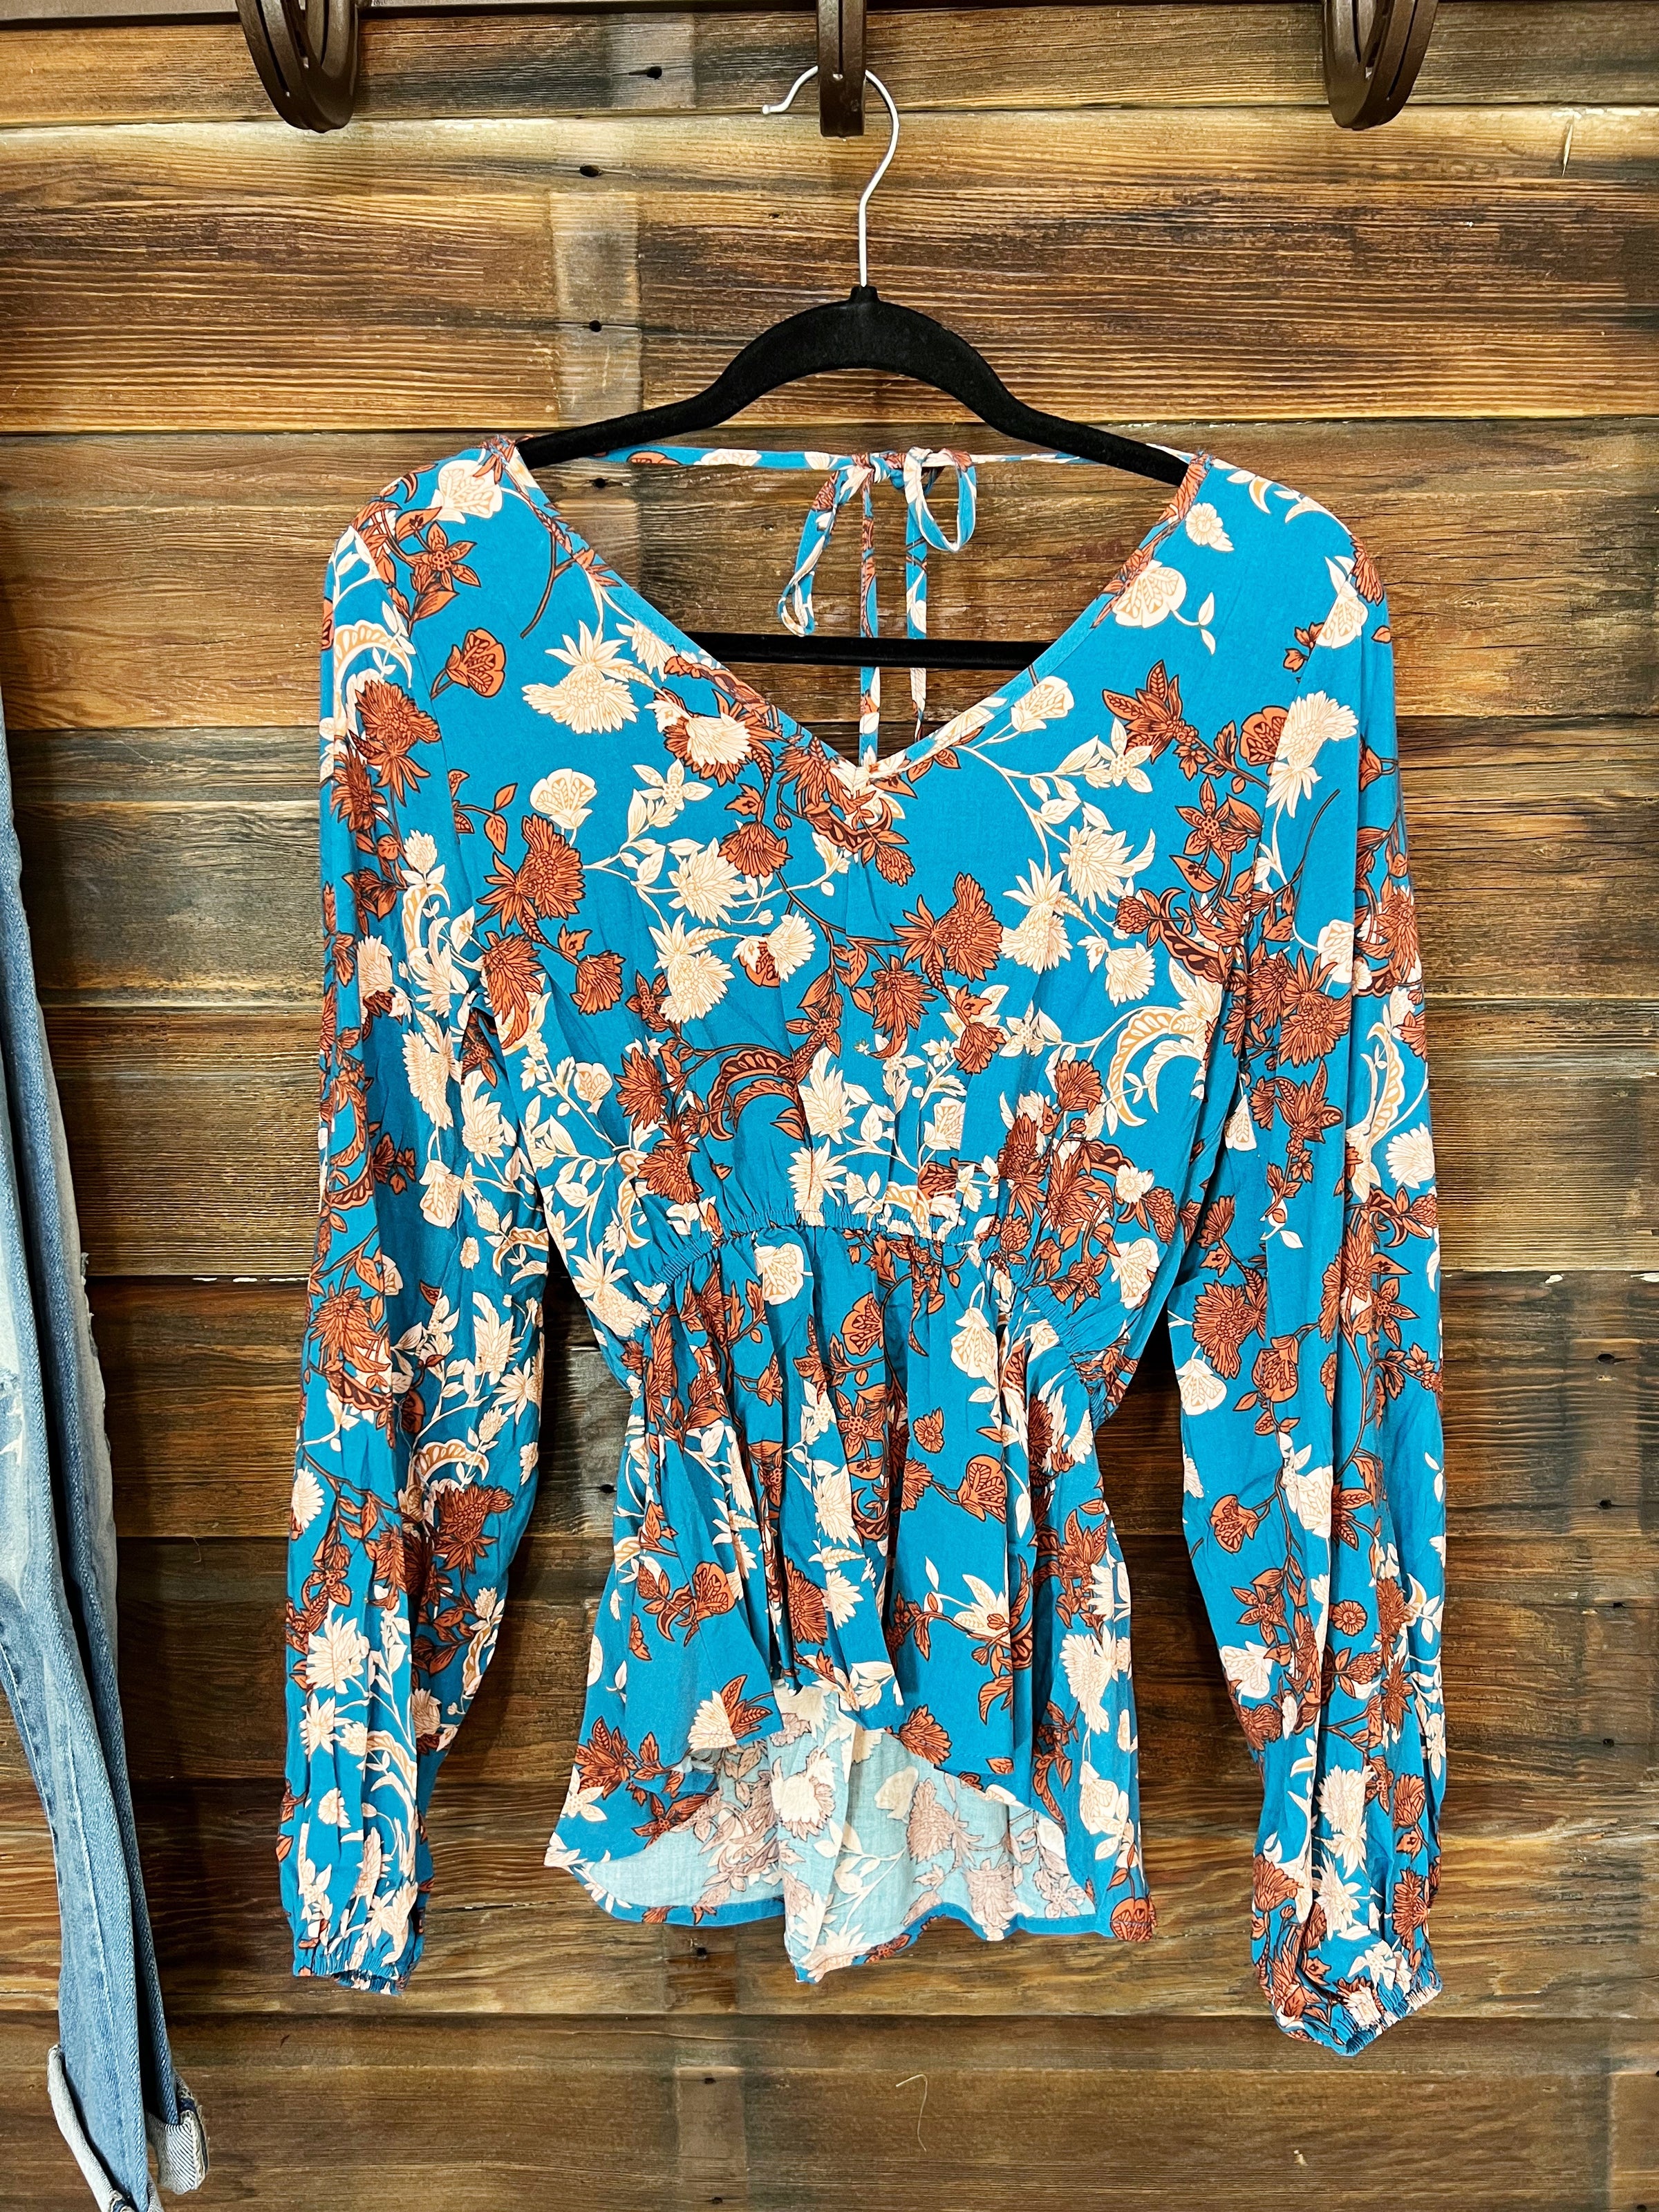 The Fall Florals Top